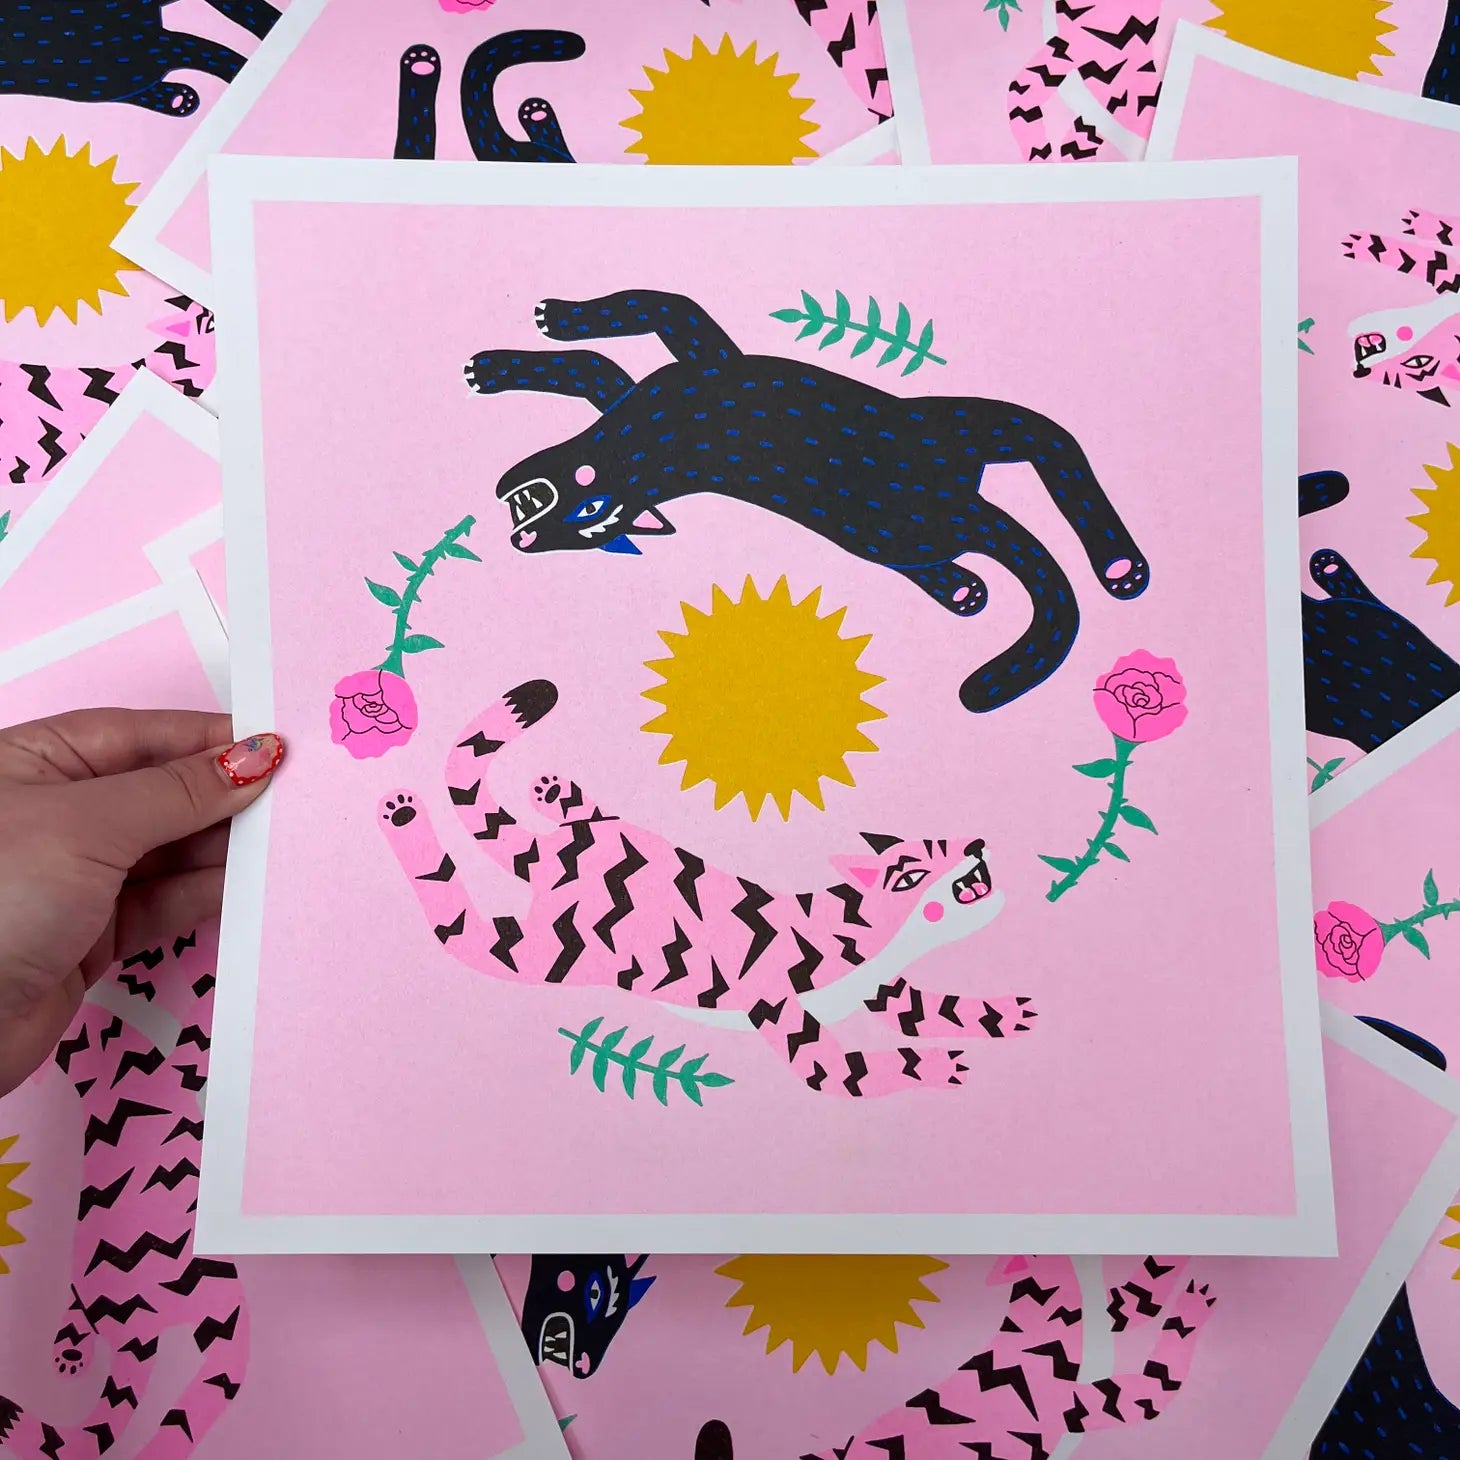 handmade square print leaping cats by Amy Hastings, neon cats black and pink, leaping in a circle